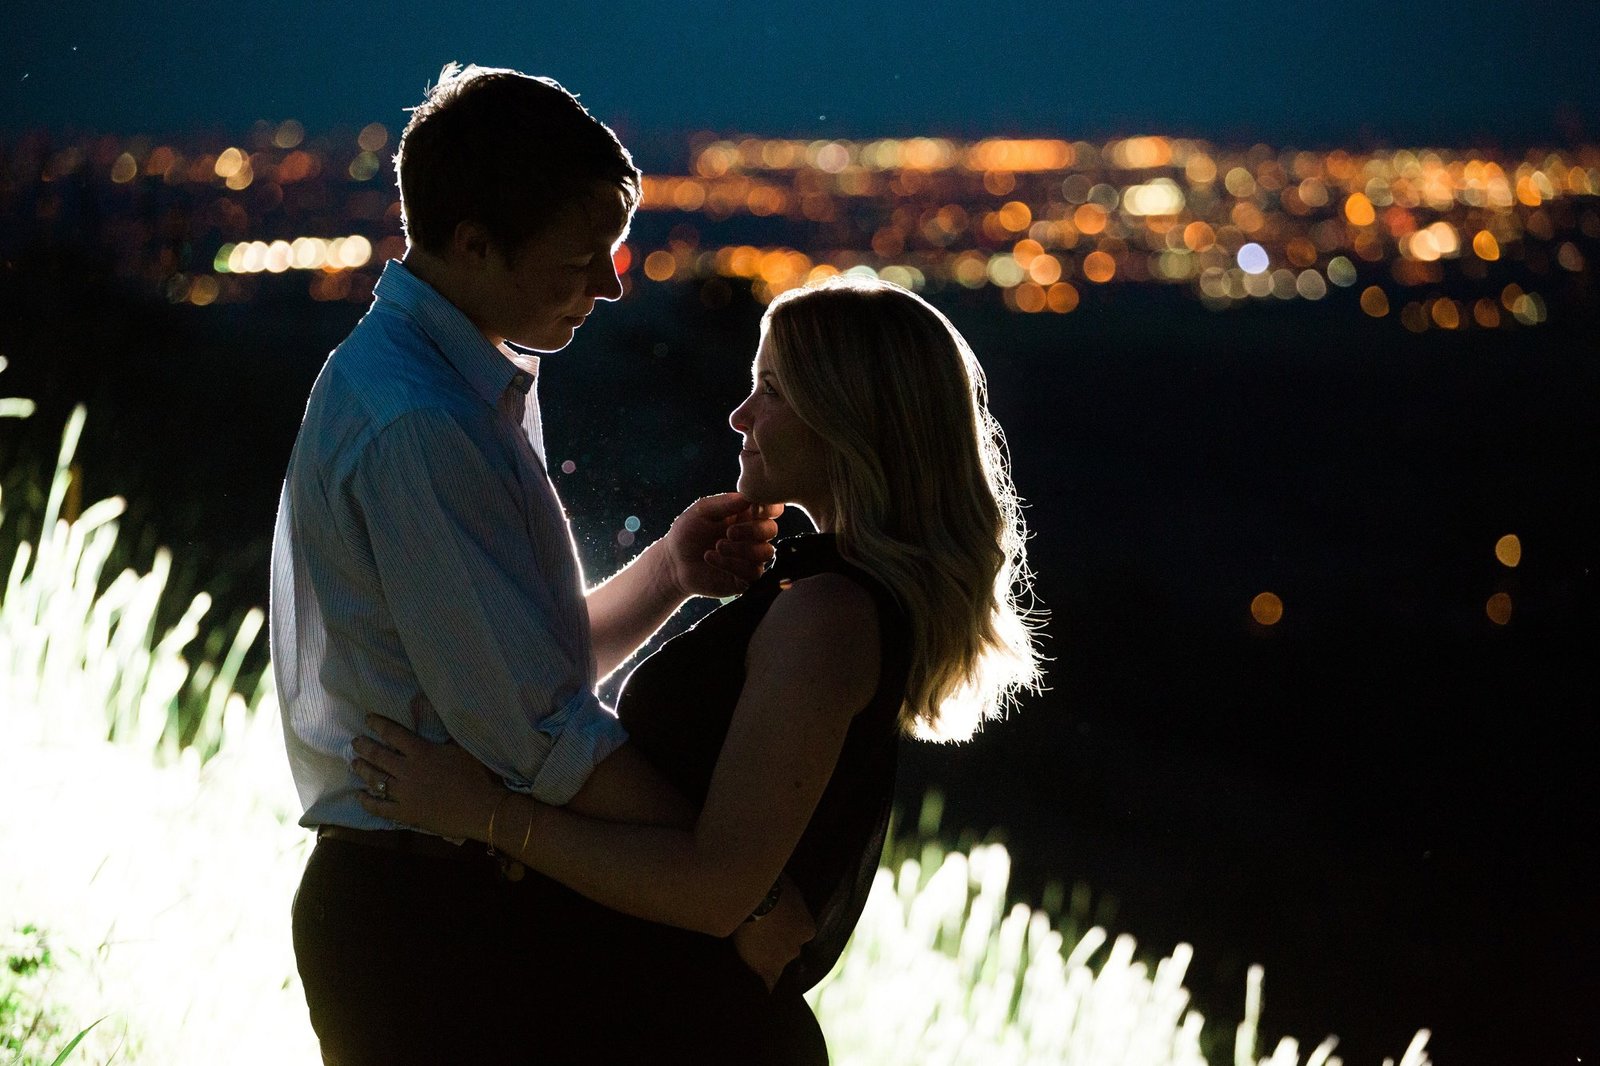 Engagements -Denver Lookout Mountain Engagement Session Golden Colorado Wedding Photographer Overlook City Lights Nature Outdoors Valley Light Couple (1)